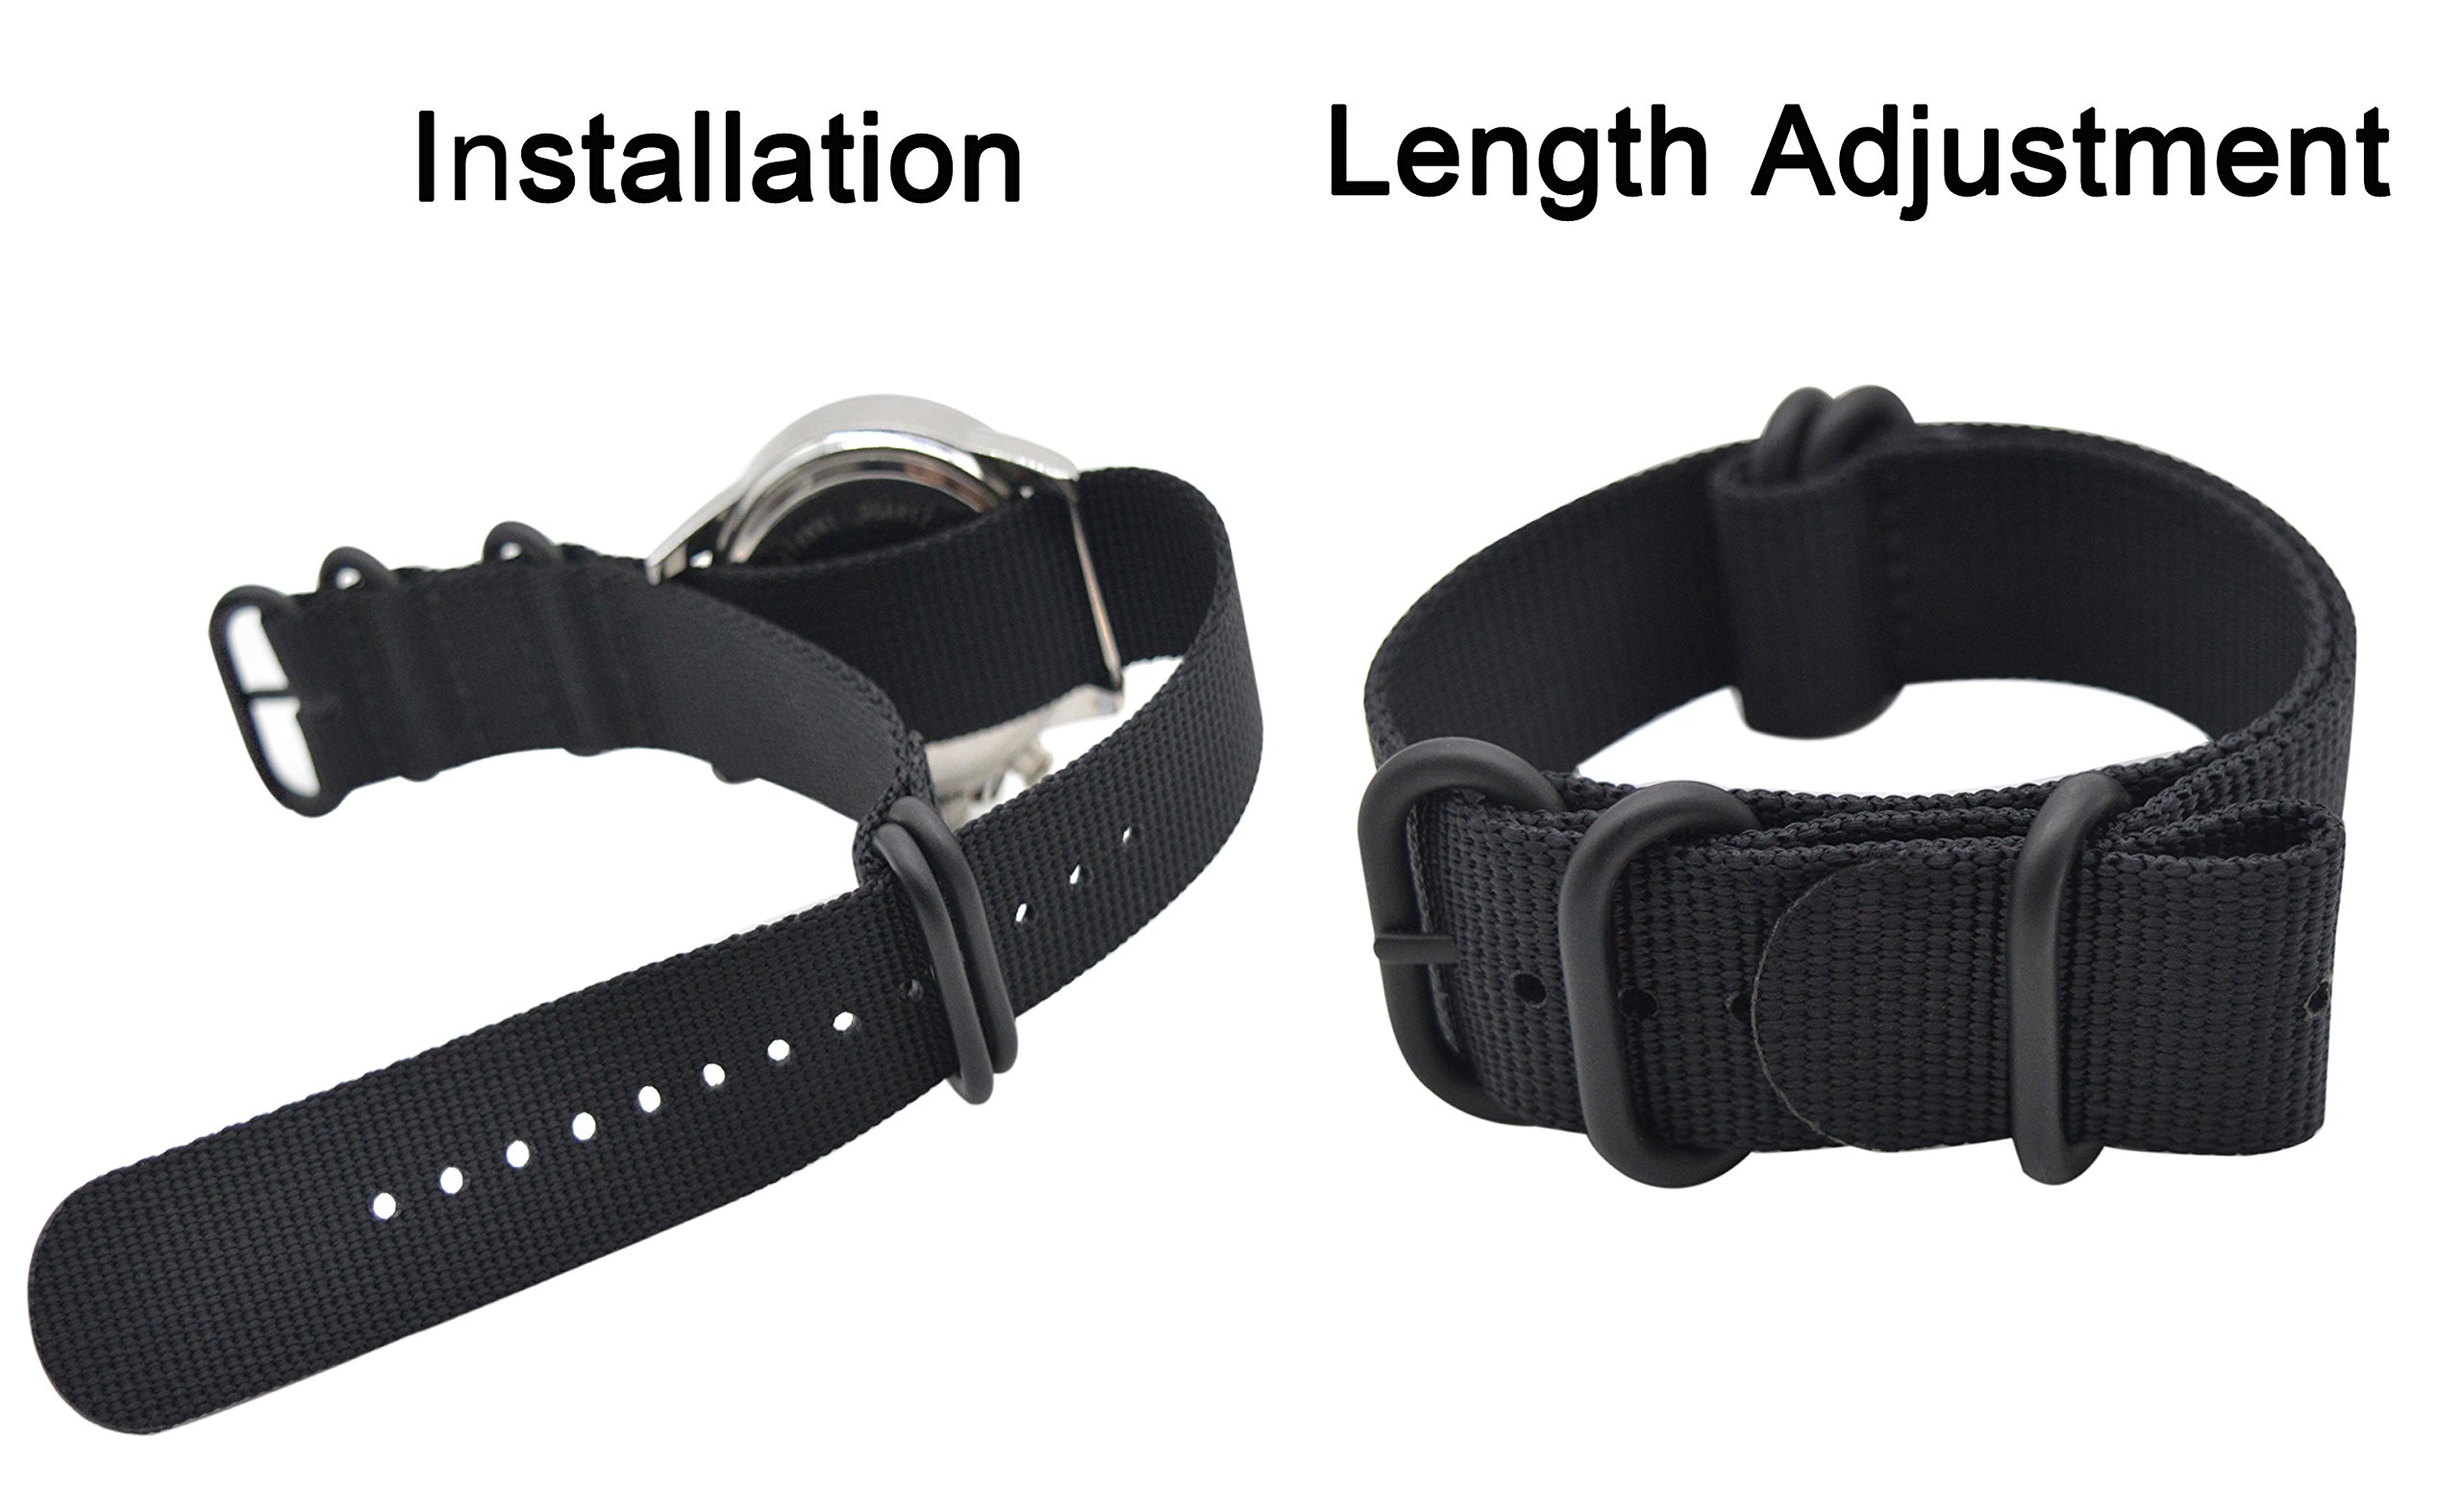 ArtStyle Watch Band with Ballistic Nylon Material Strap and High-End Black Buckle (Matte Finish Buckle)